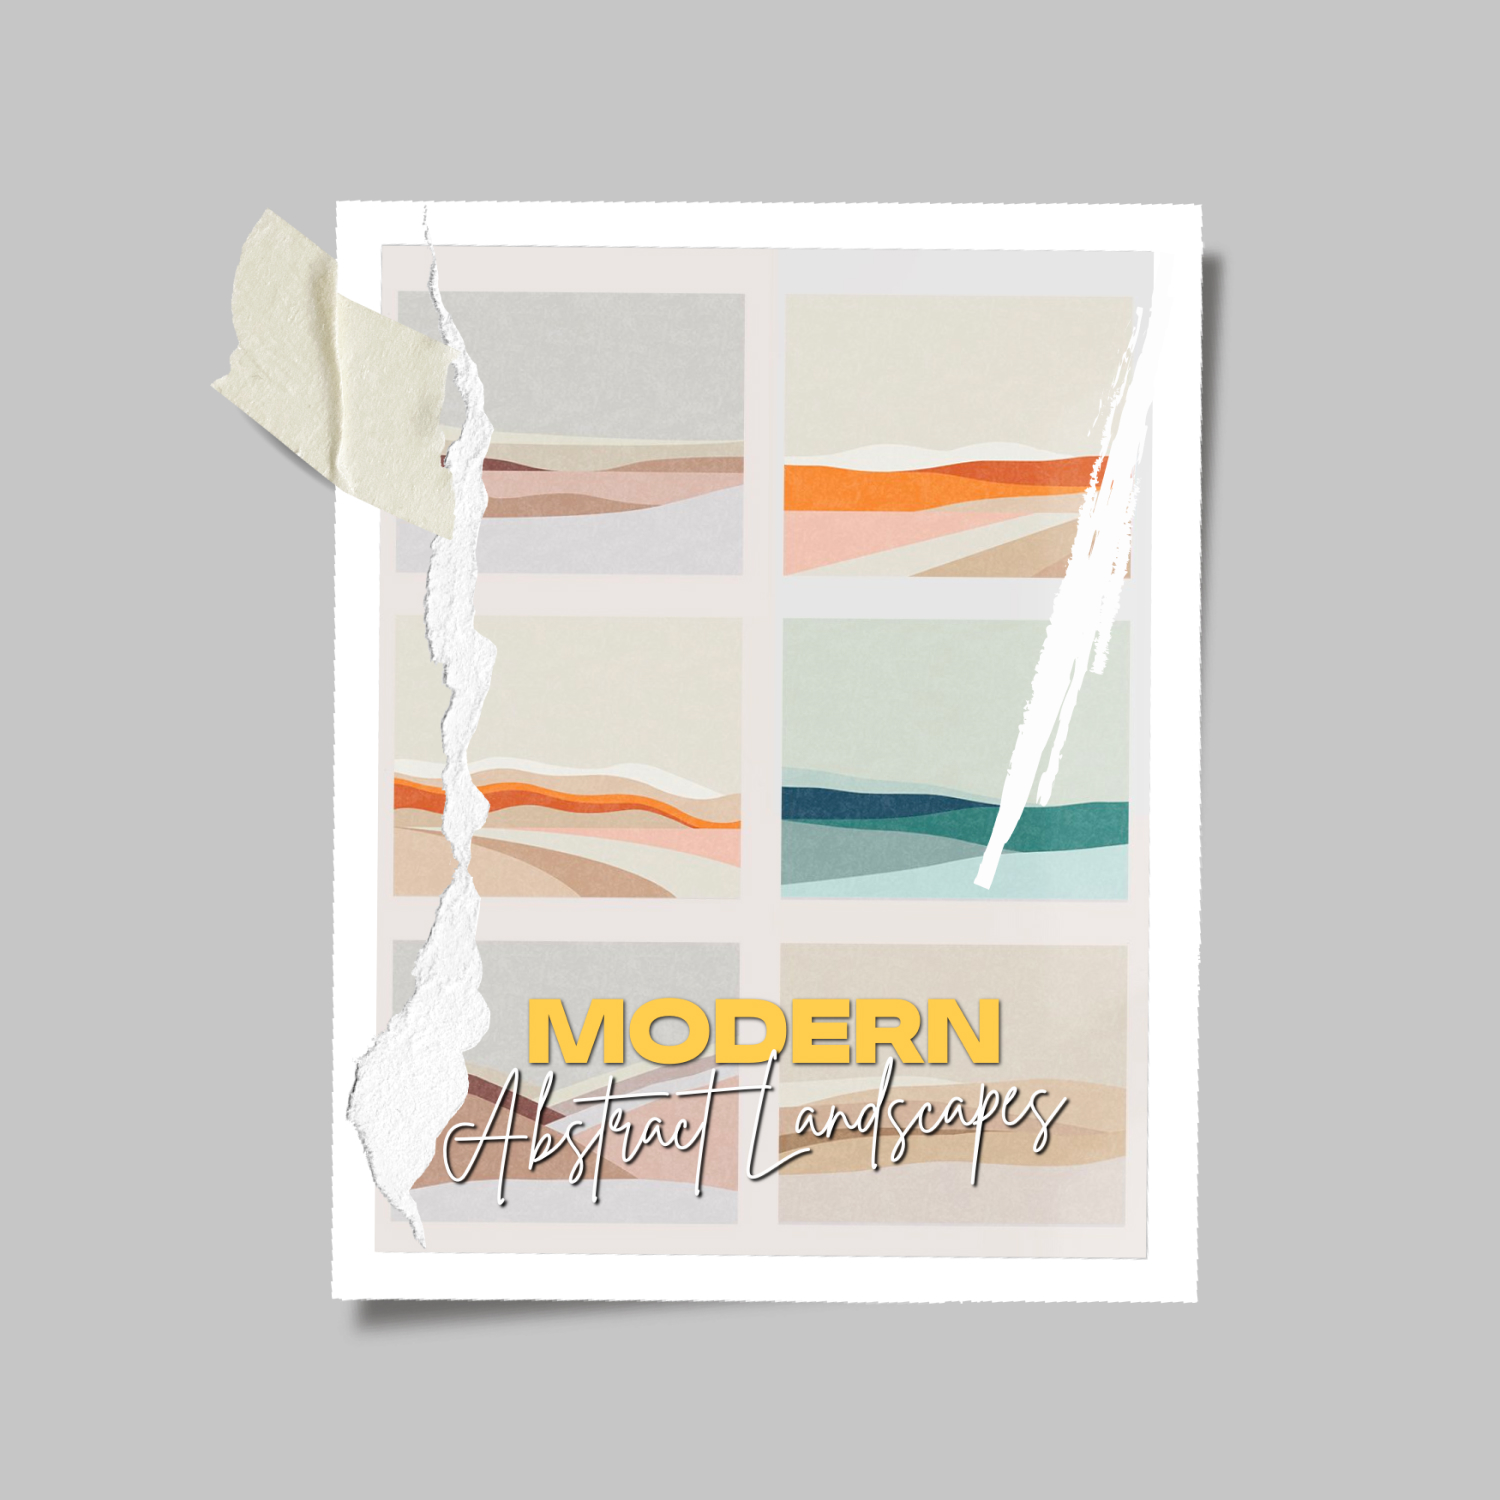 Modern Abstract Landscapes.